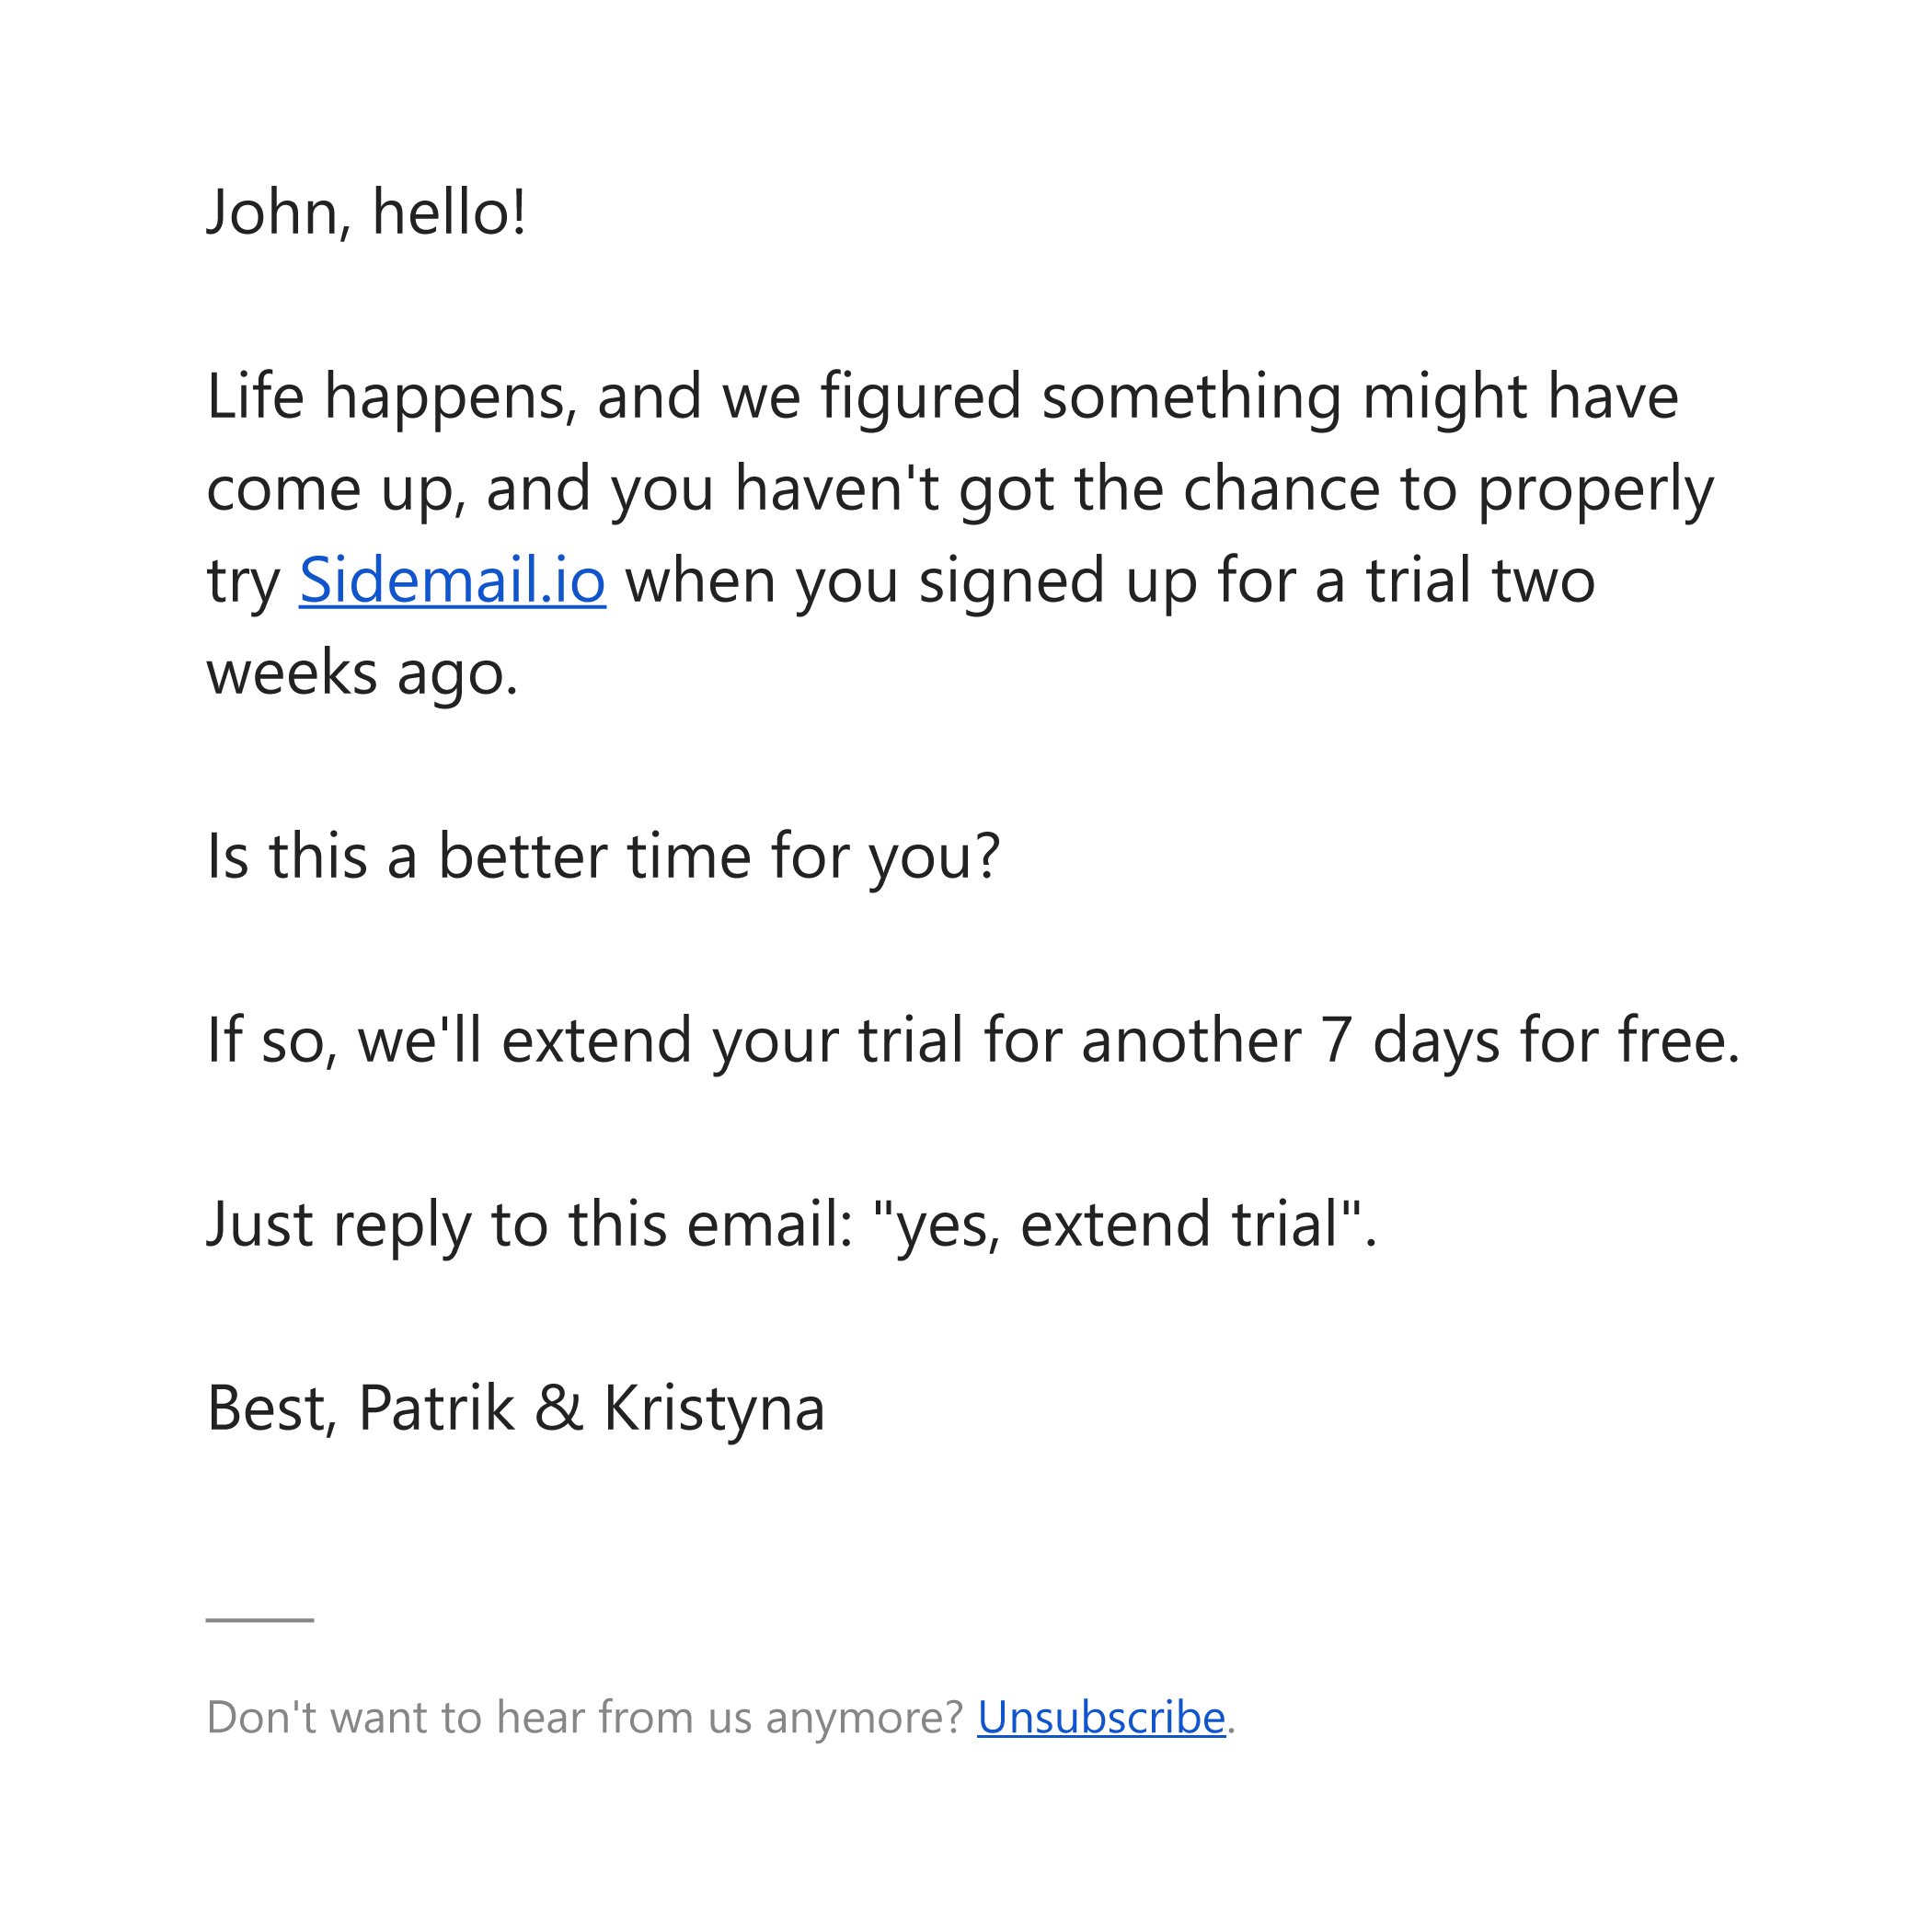 An example of text-based email